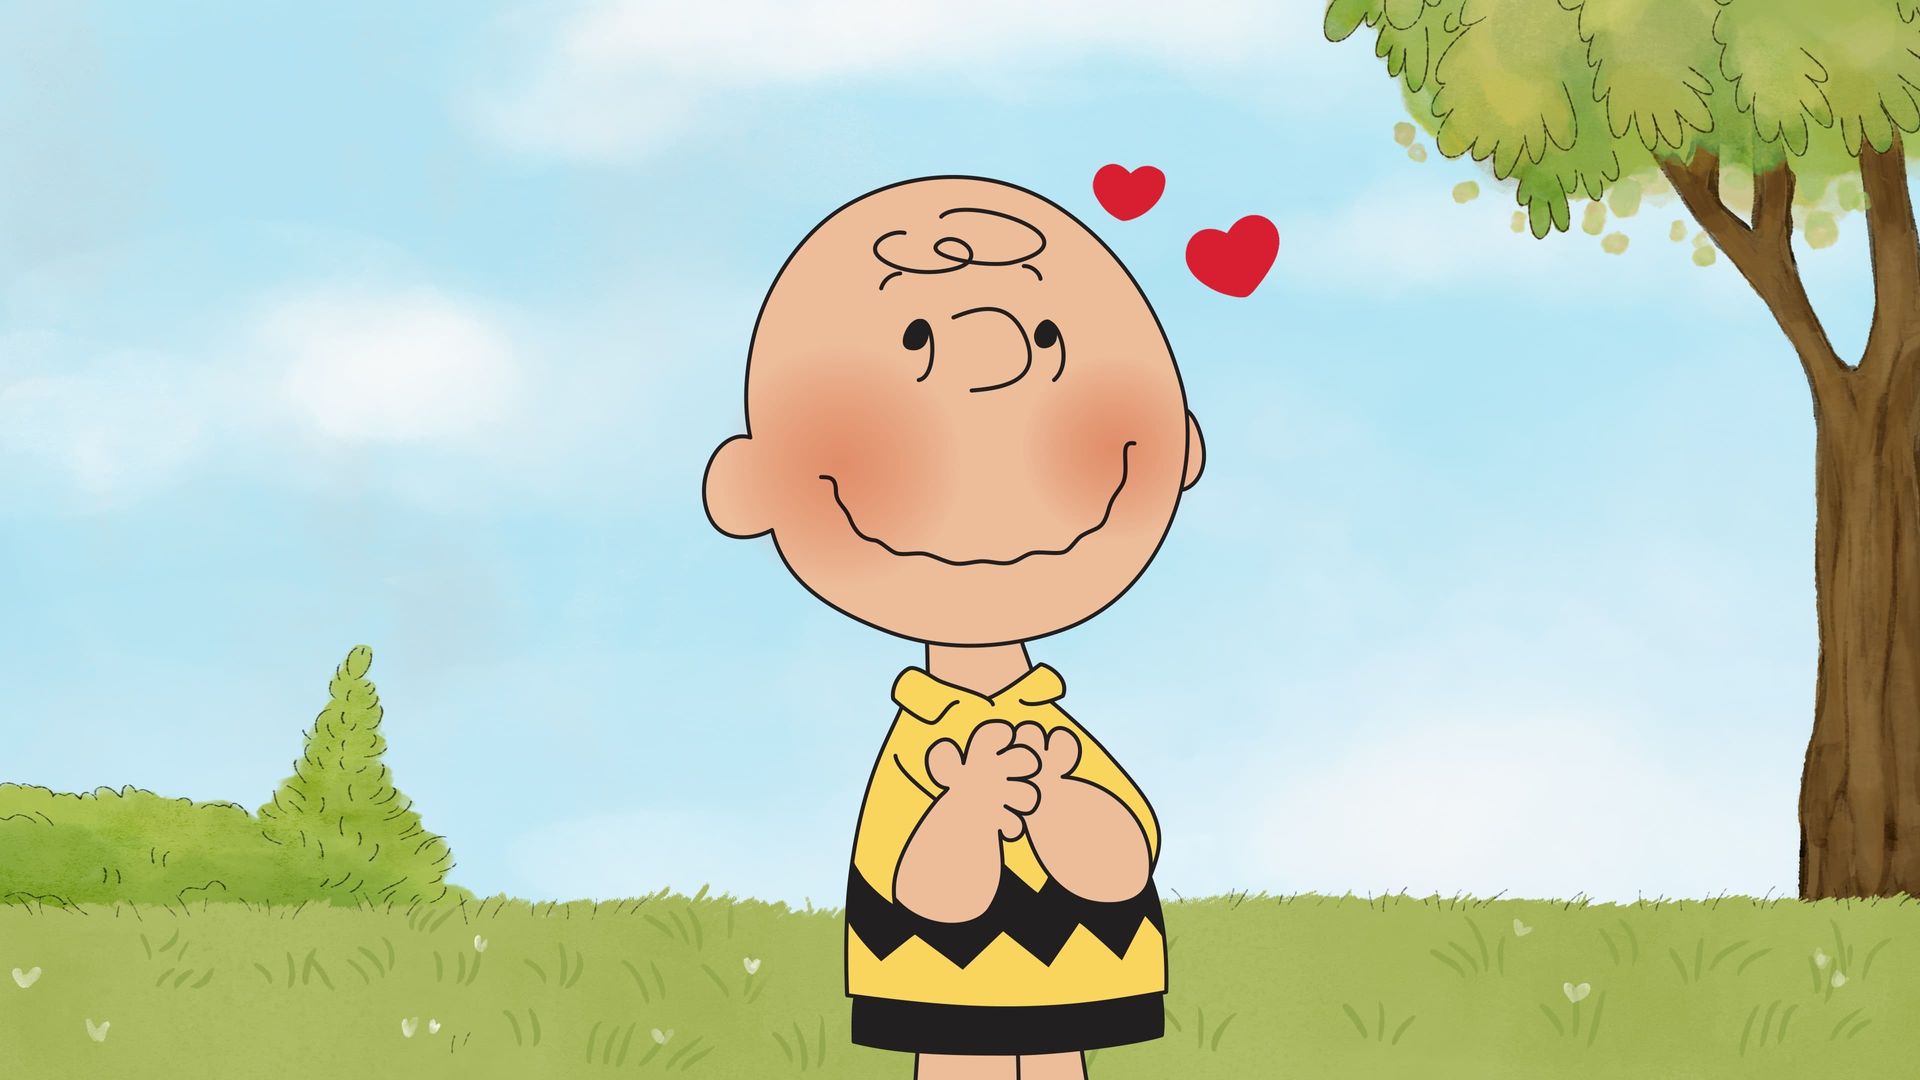 Someday You'll Find Her, Charlie Brown background